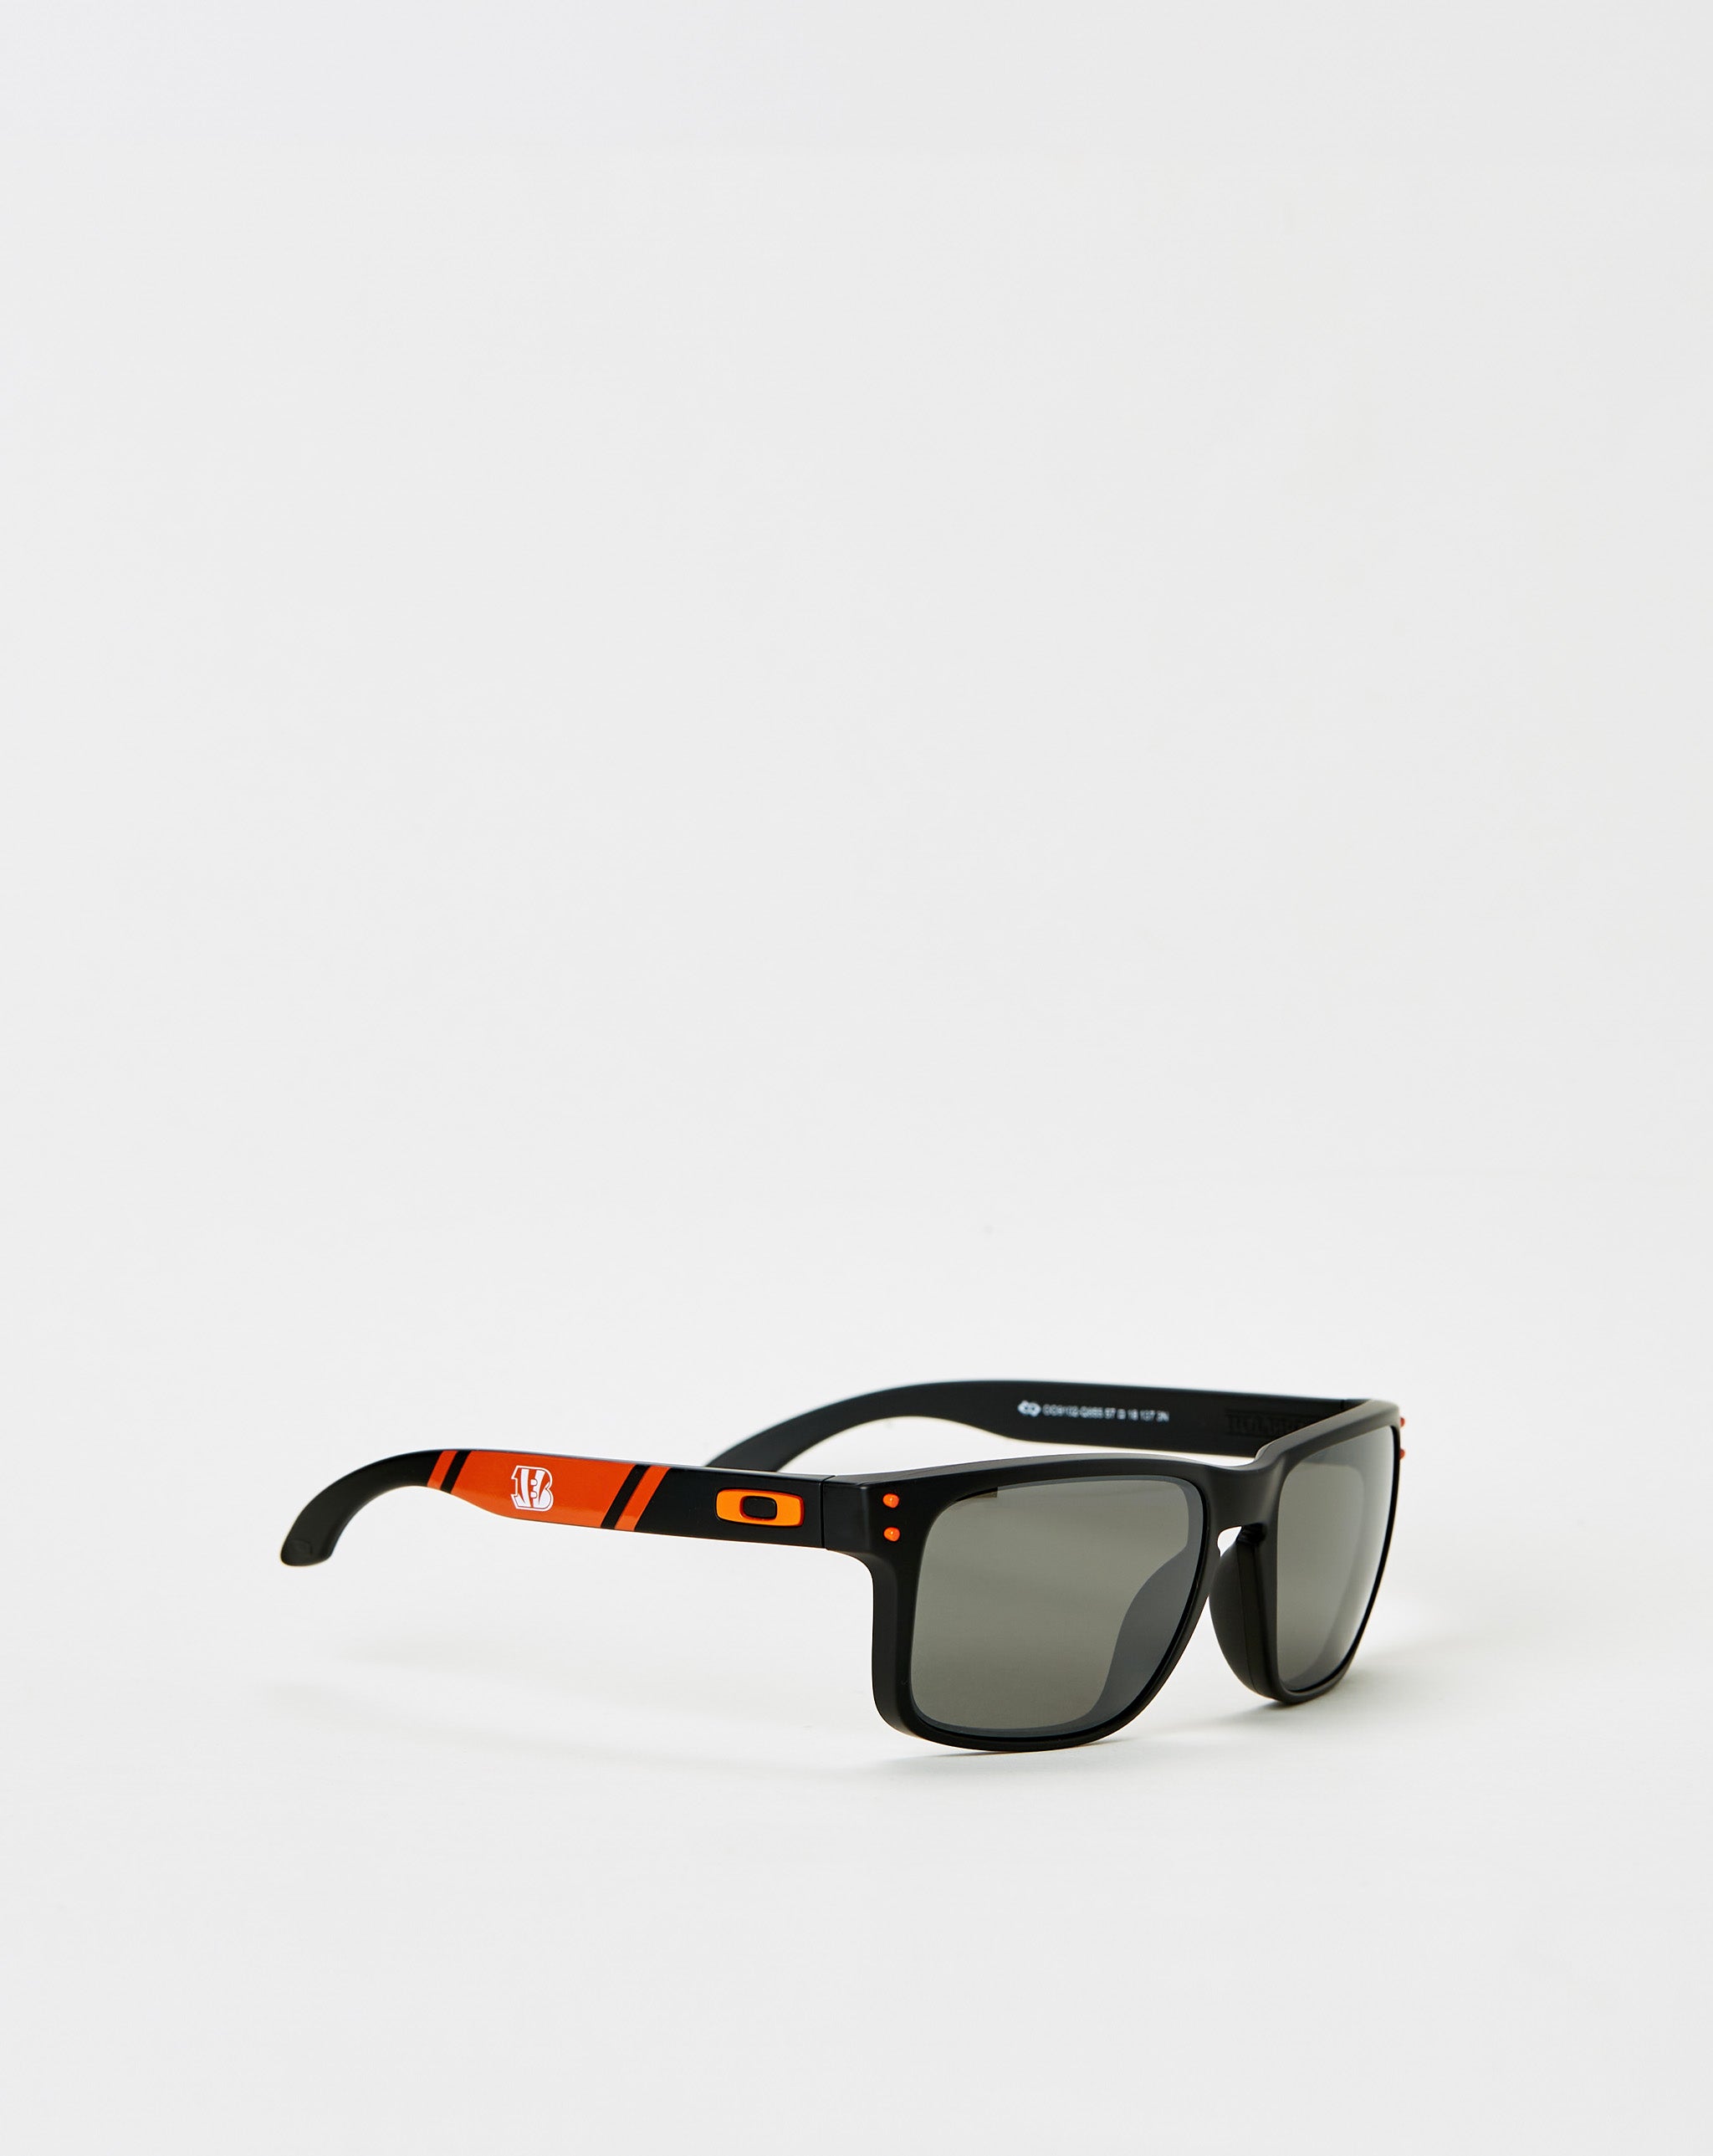 Oakley sunglasses boasts a statement cat-eye silhouette with gradient lenses;  - Cheap Cerbe Jordan outlet